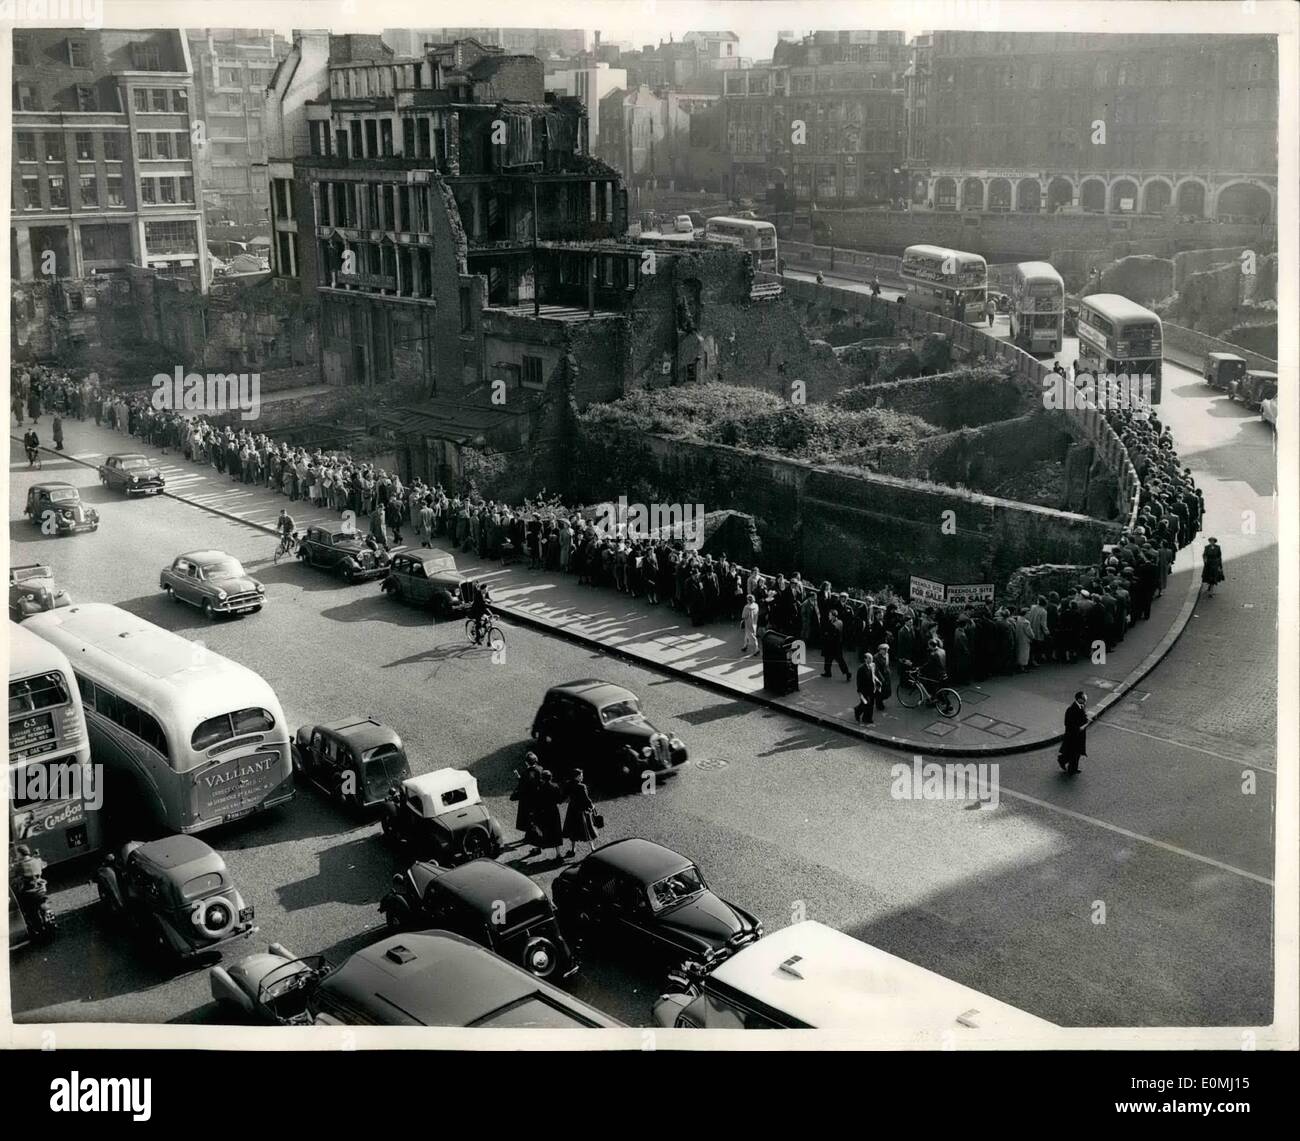 Jun. 06, 1955 - Strike Ses London the long queue for buses: Photo shows general view of the long queue starting in Farringdon street, yesterday. They are waiting to board buses traveling to Grove Park Station. Stock Photo